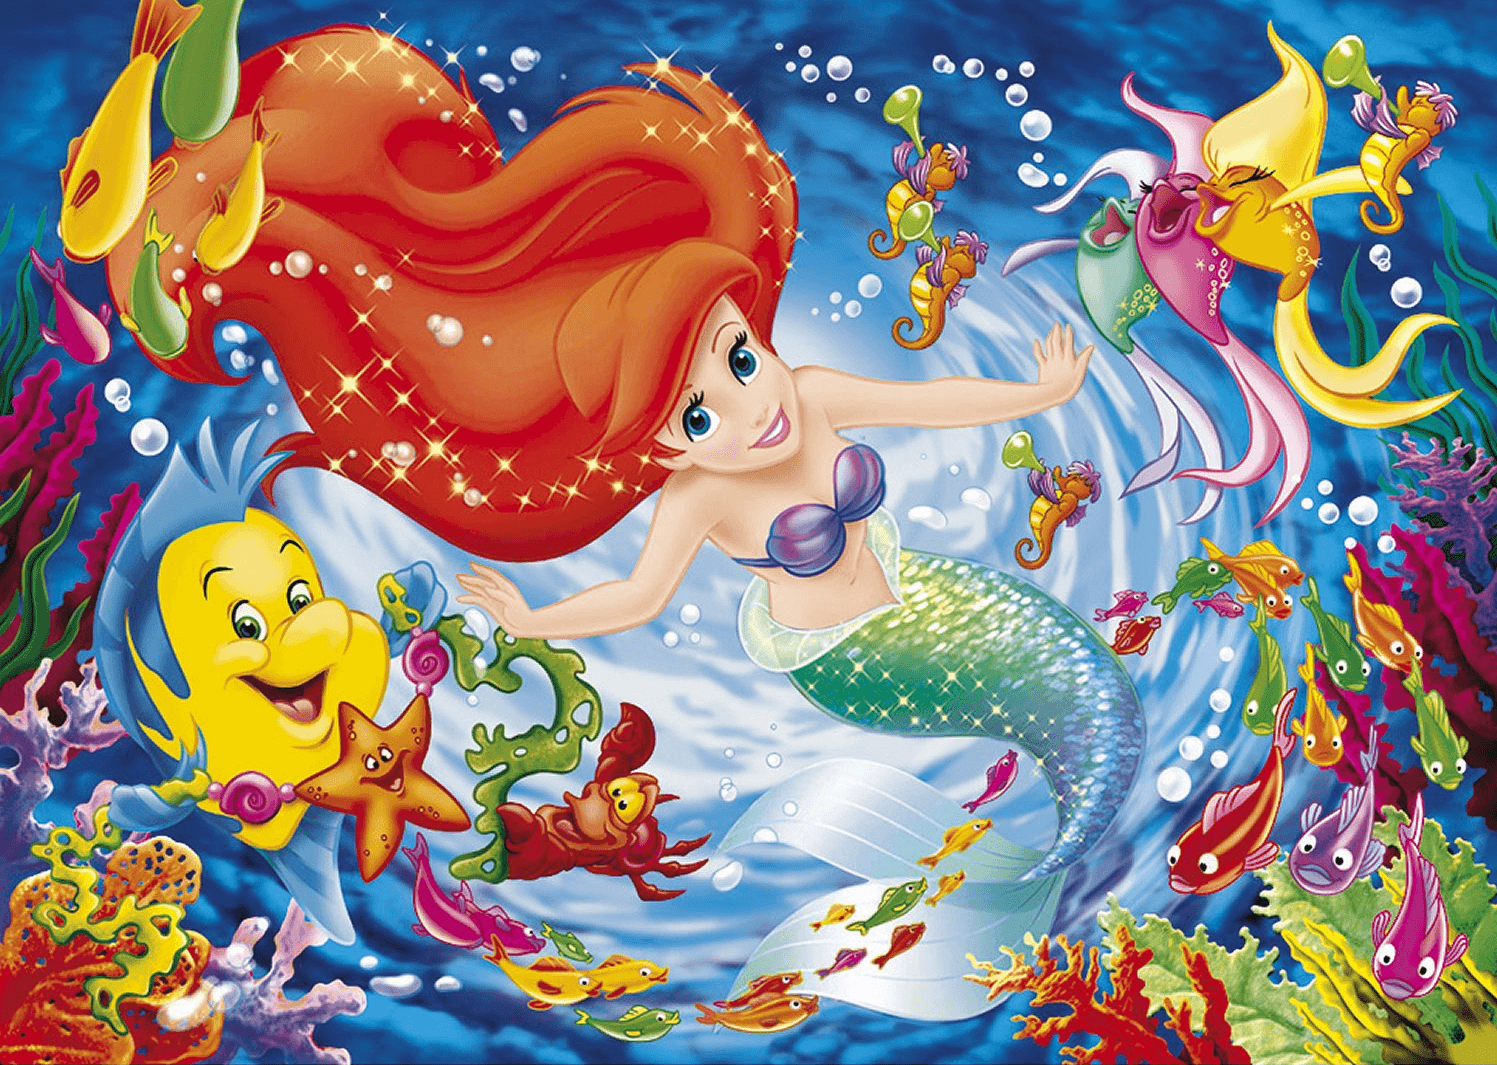 the little mermaid wallpapers wallpaper cave on the little mermaid wallpapers